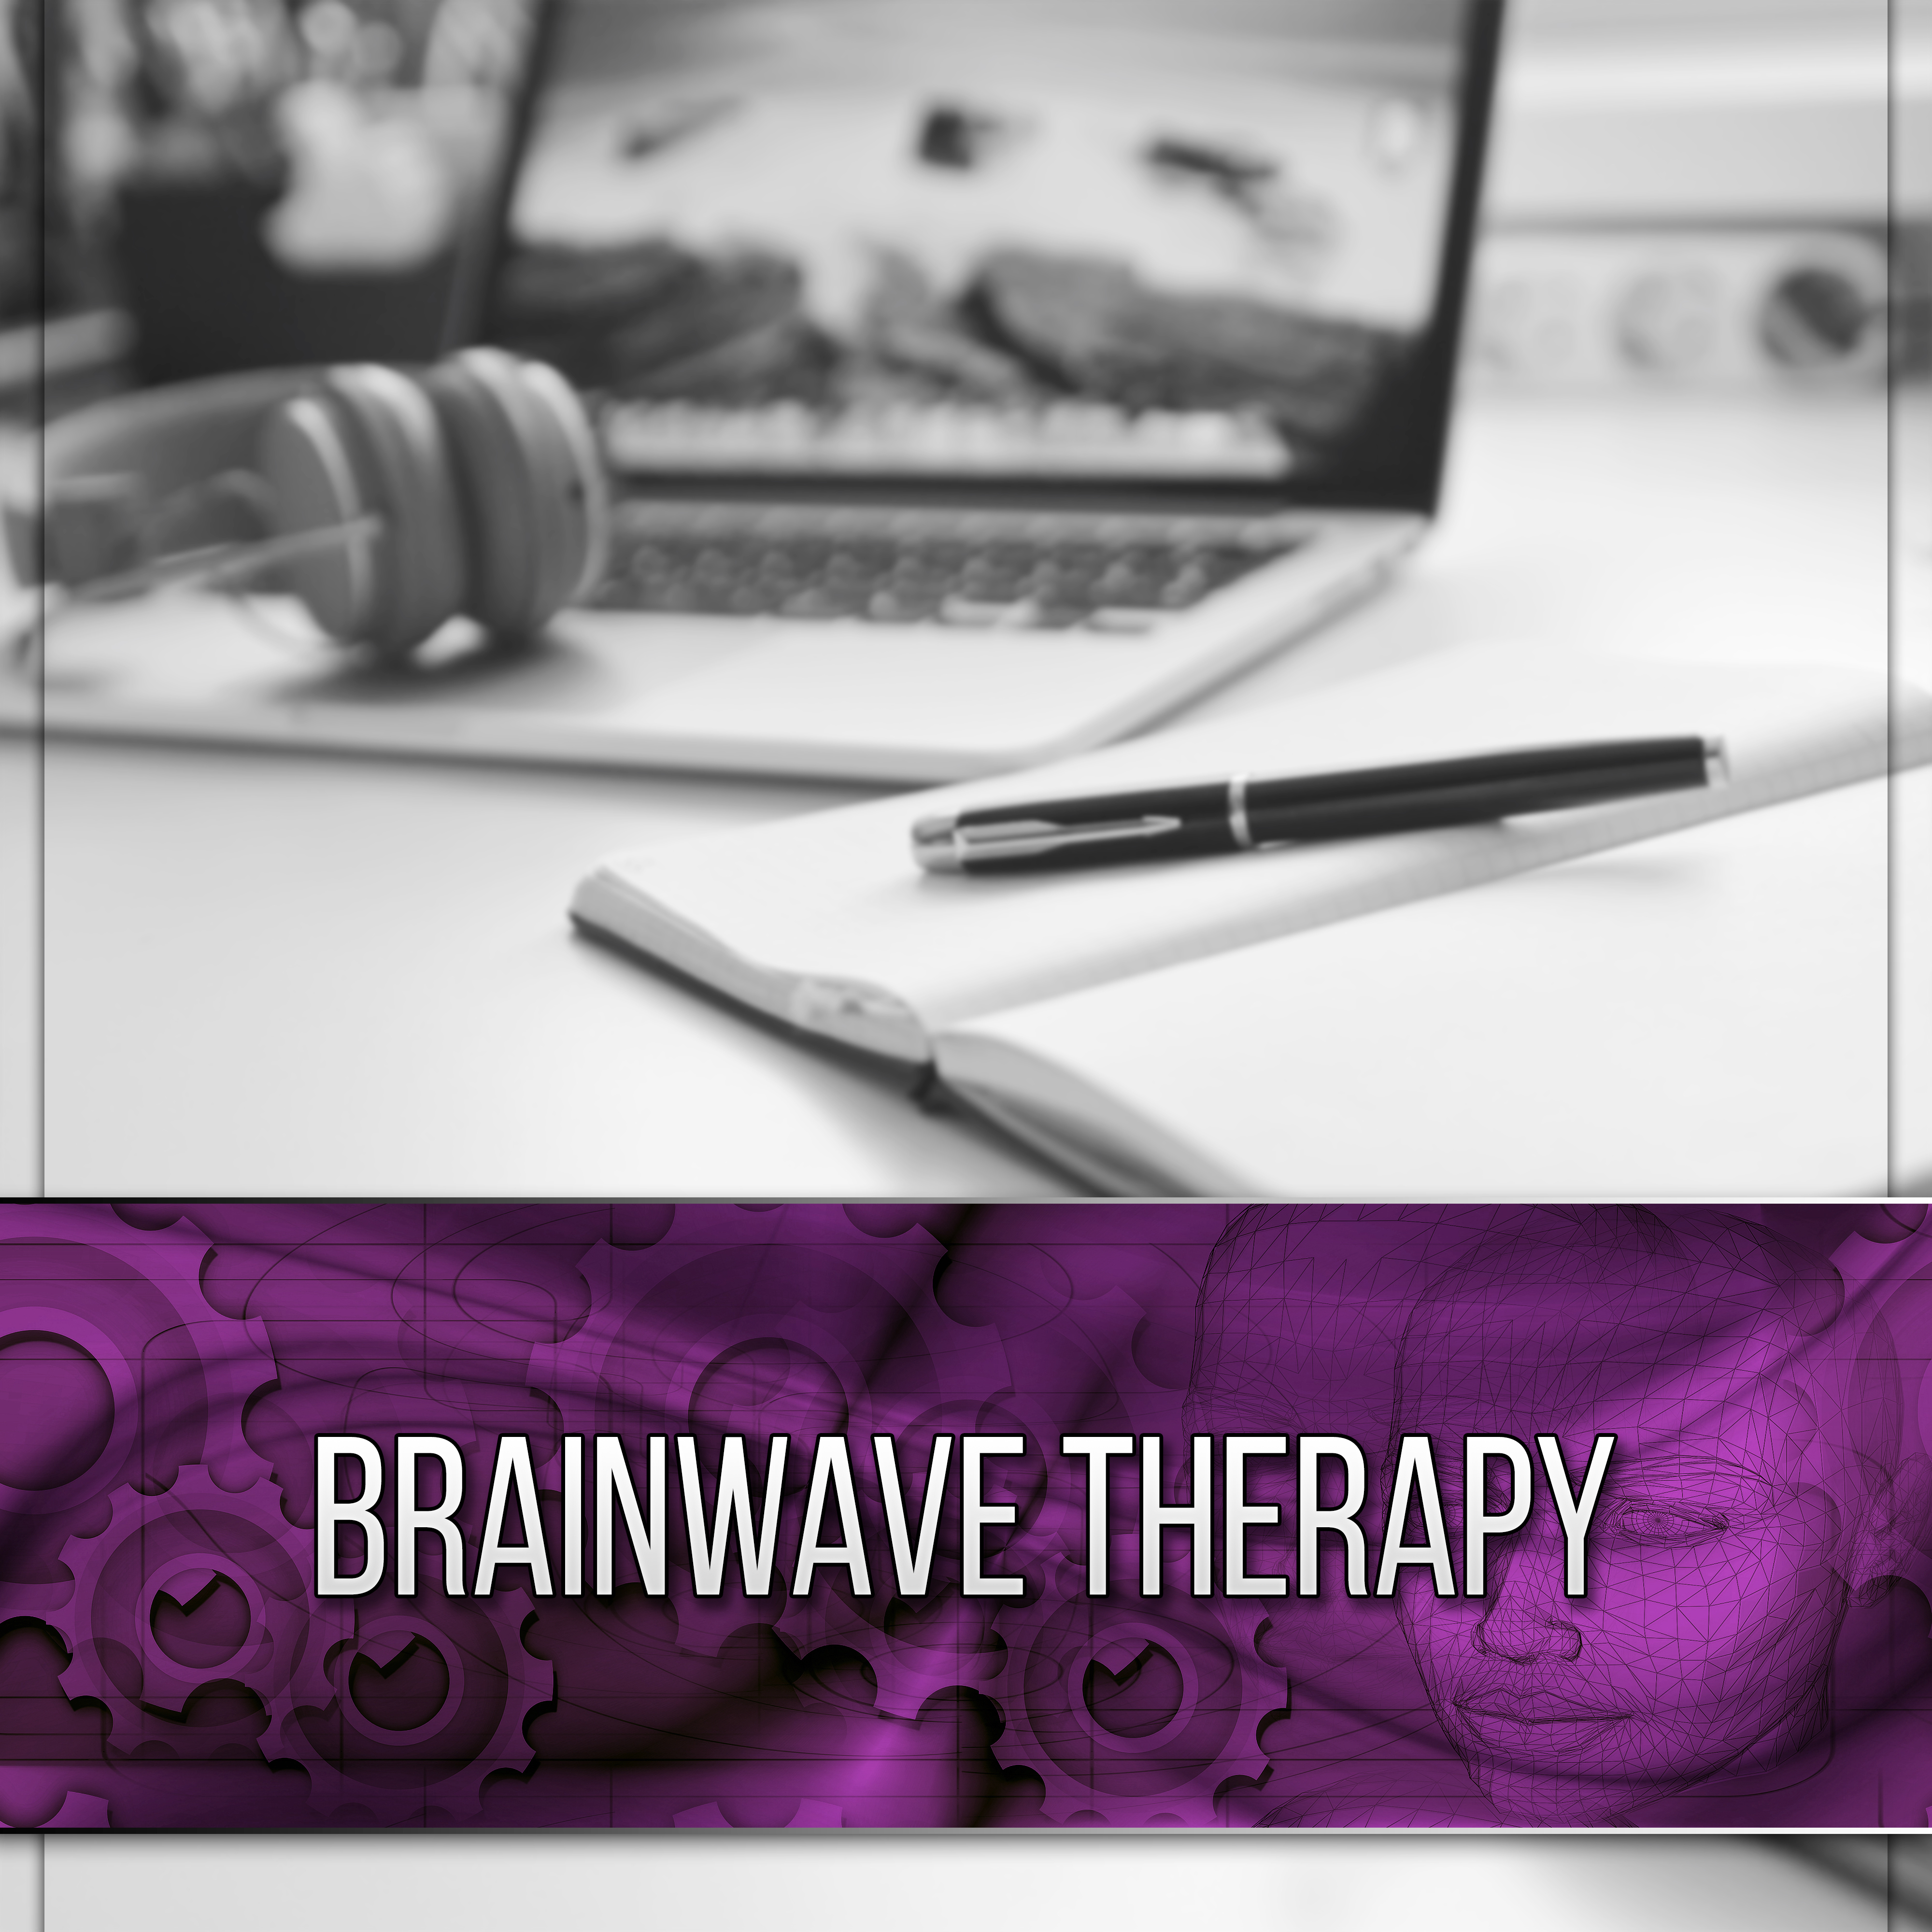 Brainwave Therapy - Concentration, Neurofeedback, Alpha Waves, Hypnosis, Theta Waves, Study Music